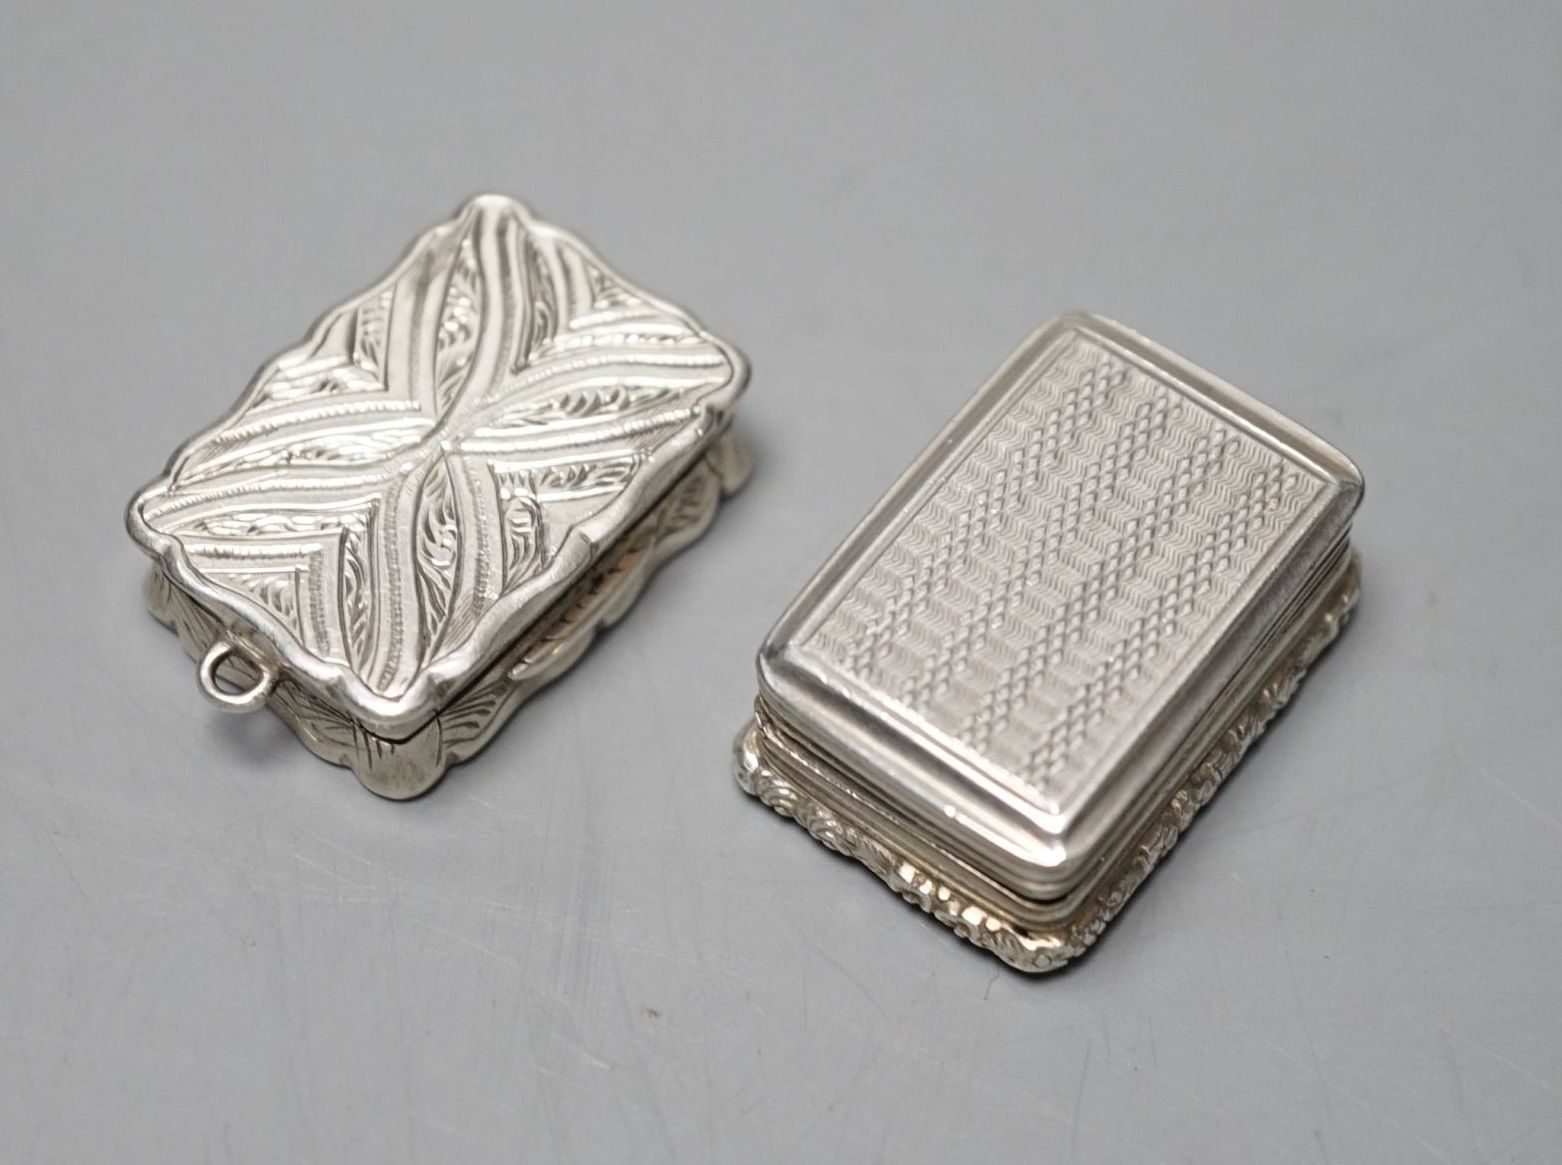 A George IV engine turned silver rectangular vinaigrette, Thomas & William Simpson, Birmingham, 1823, 30mm and a later silver vinaigrette by George Unite, Birmingham, 1866, engraved with the name 'Emmie', 29mm.